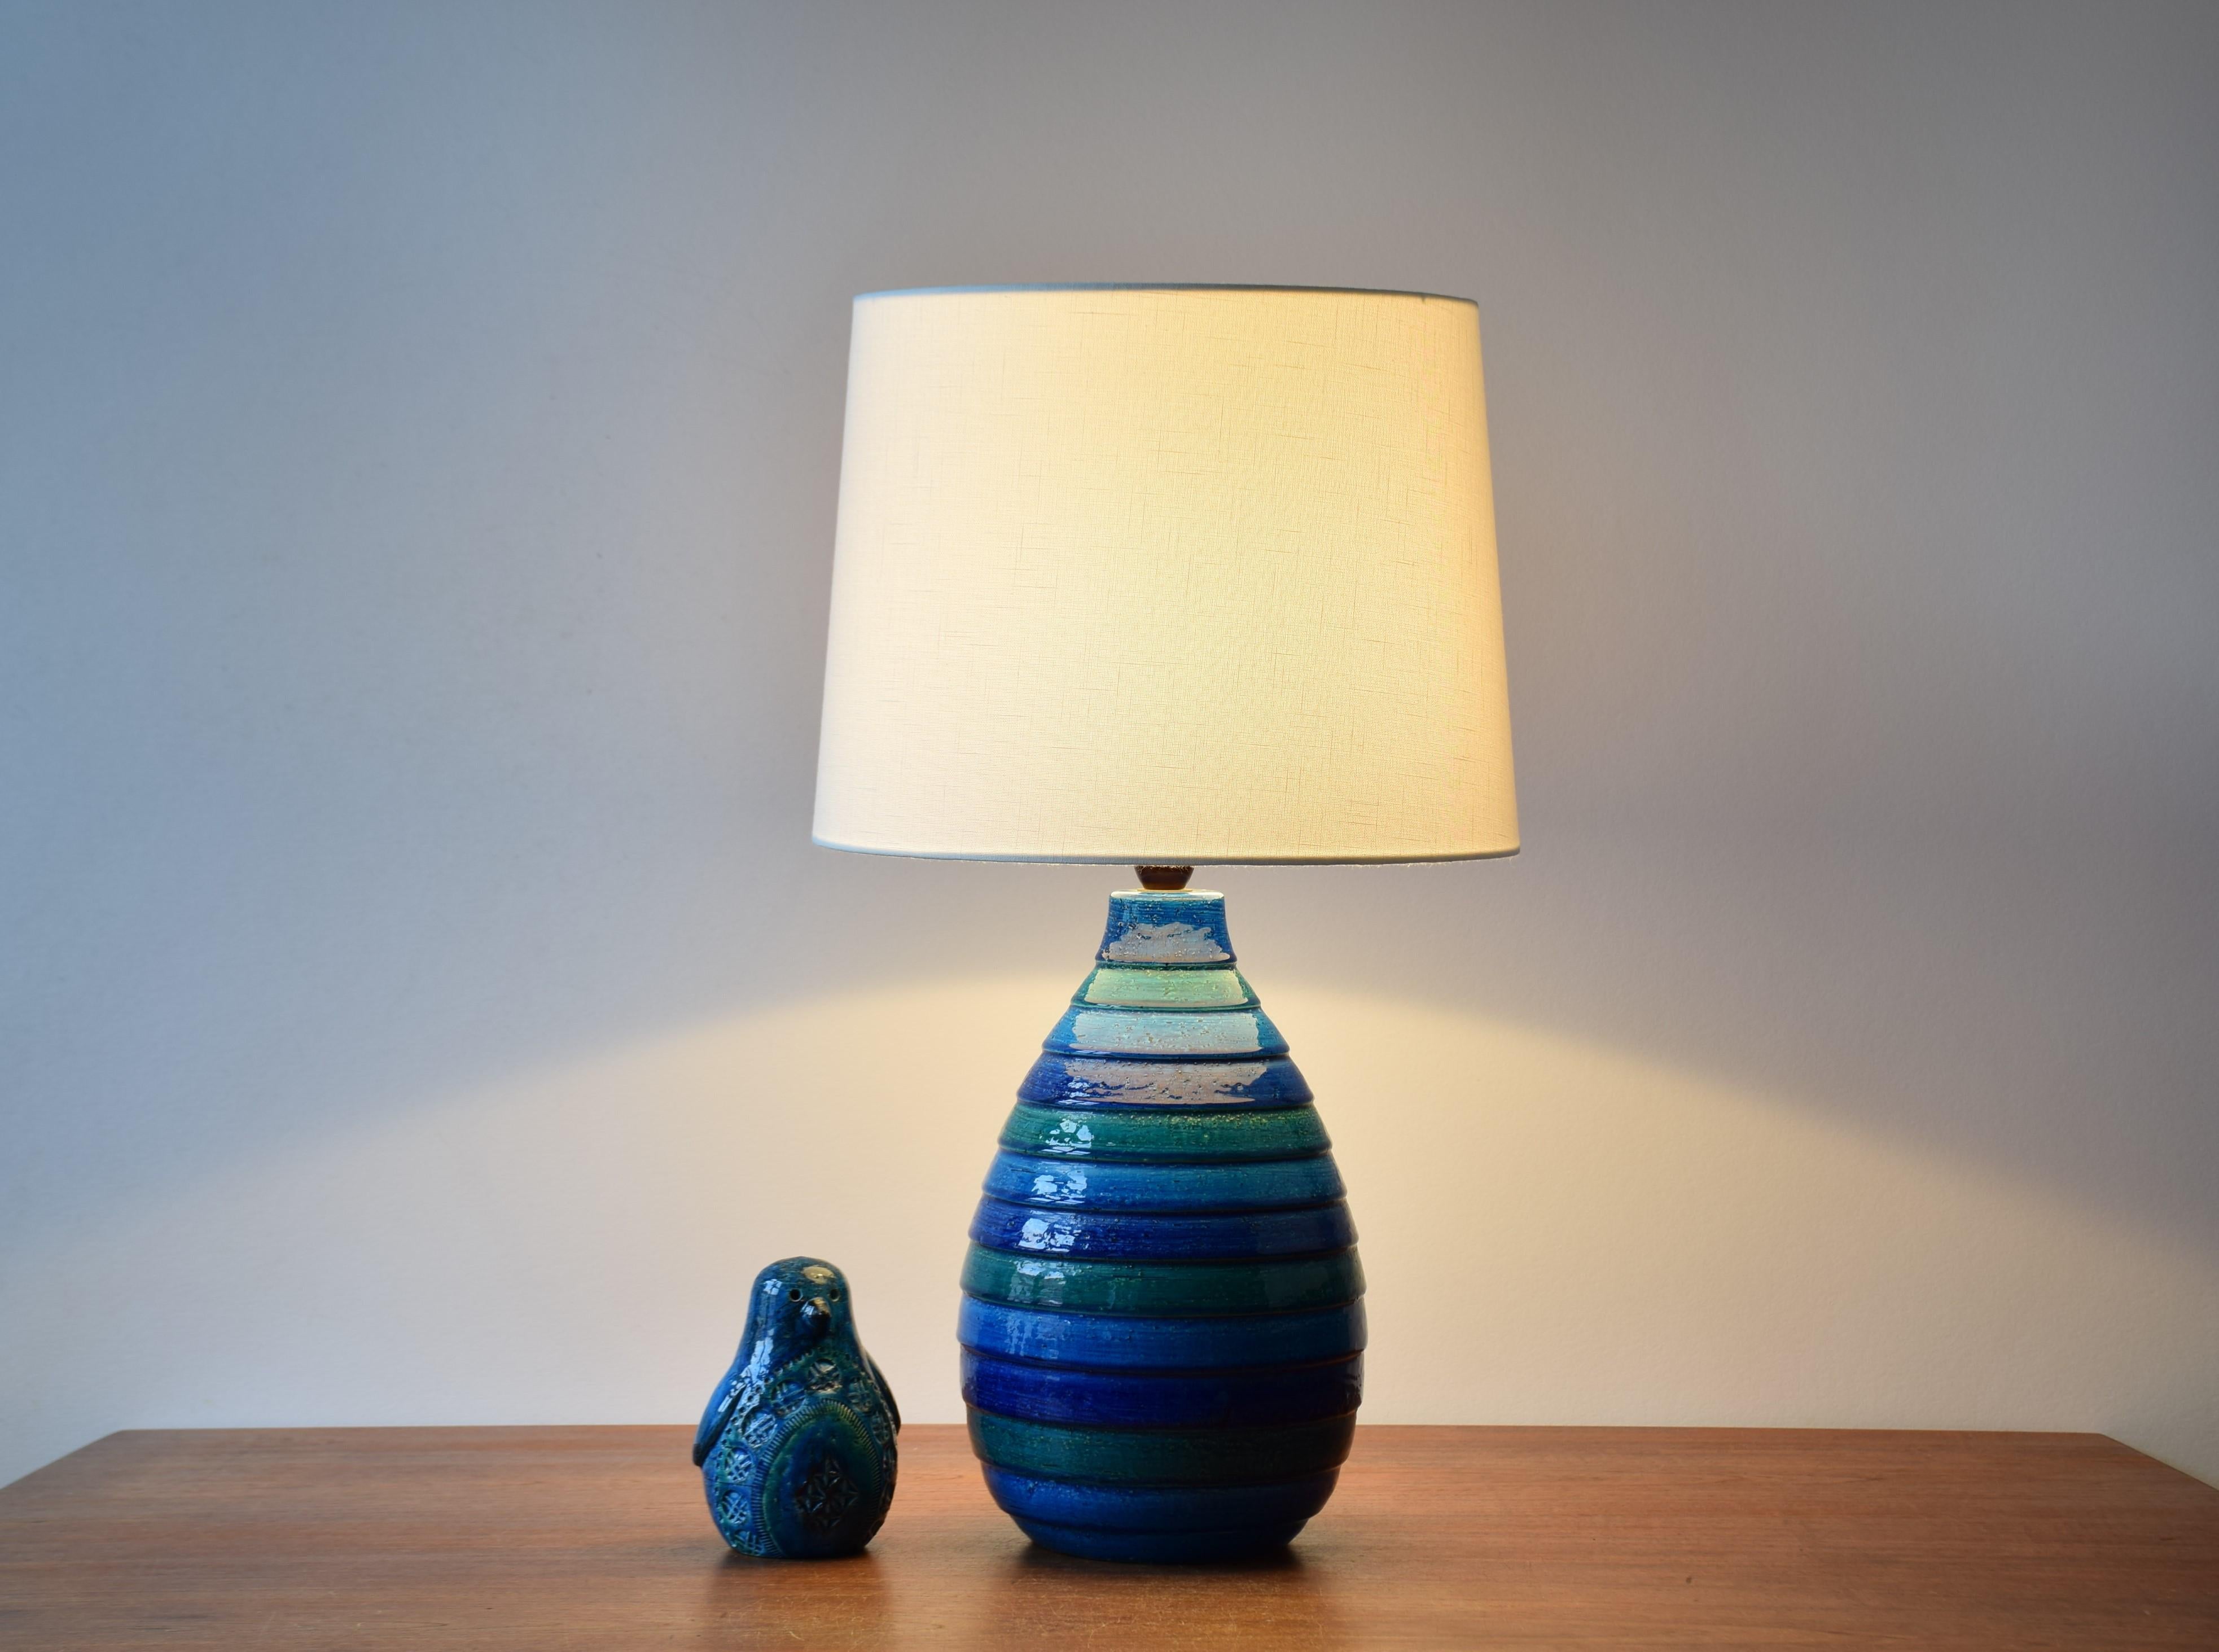 Tall vintage Bitossi ceramic table lamp designed by Aldo Londi.
It's made of ceramic with stripes in blue, turquoise and green shades.
The lamp is made in Italy, circa 1960s.

Sold without lampshade. The lampshade can be requested. 
It´s a new